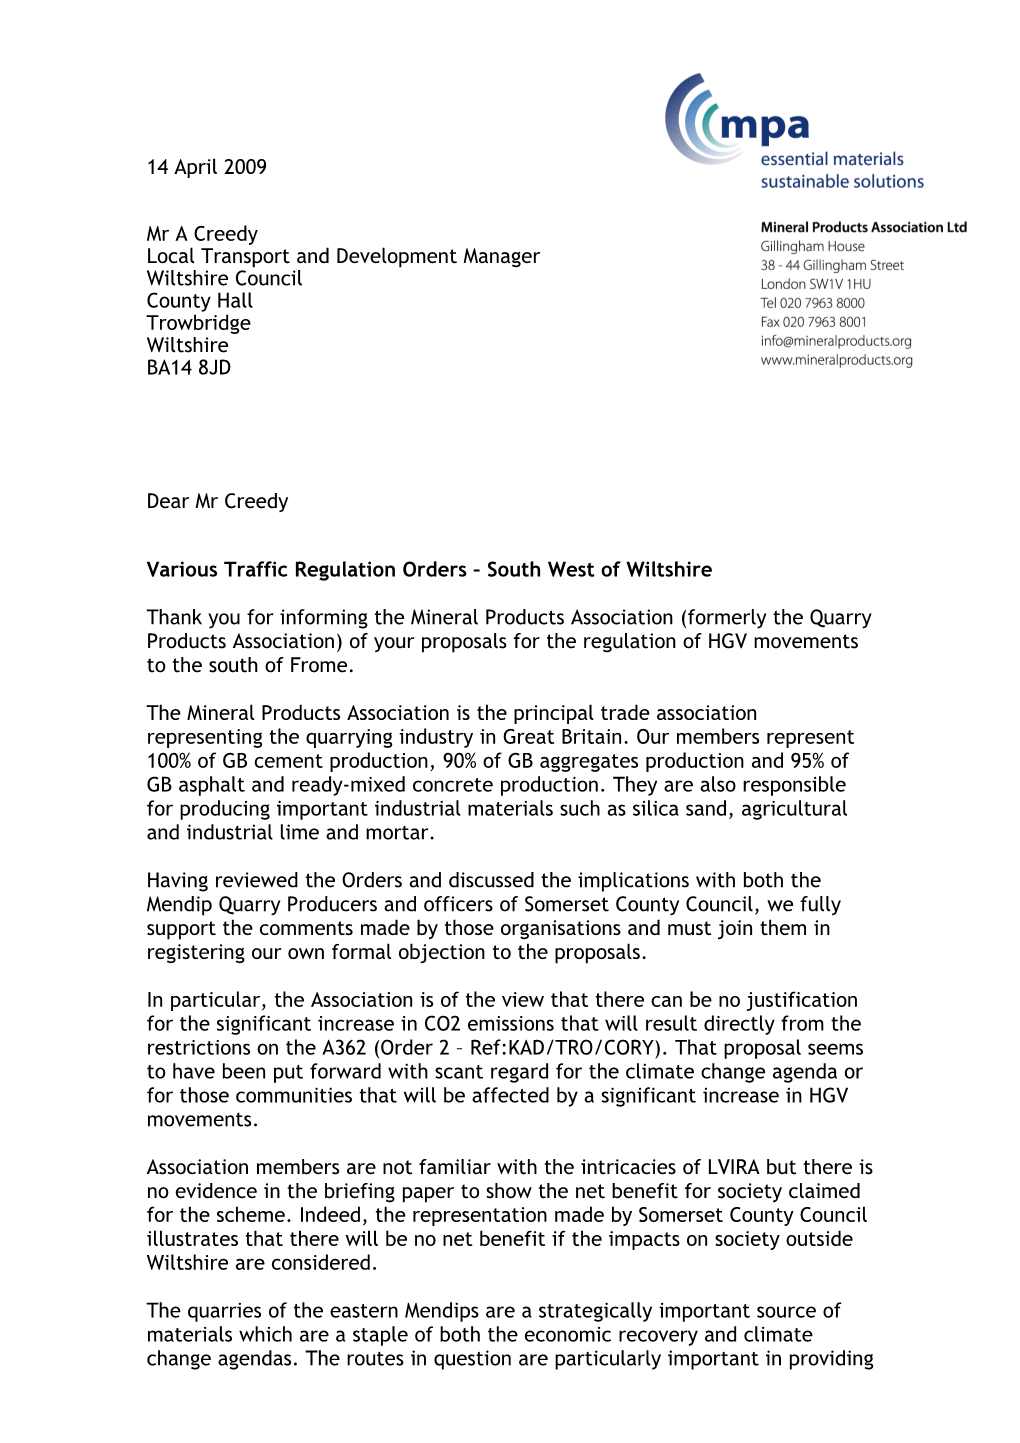 Various Traffic Regulation Orders South West of Wiltshire